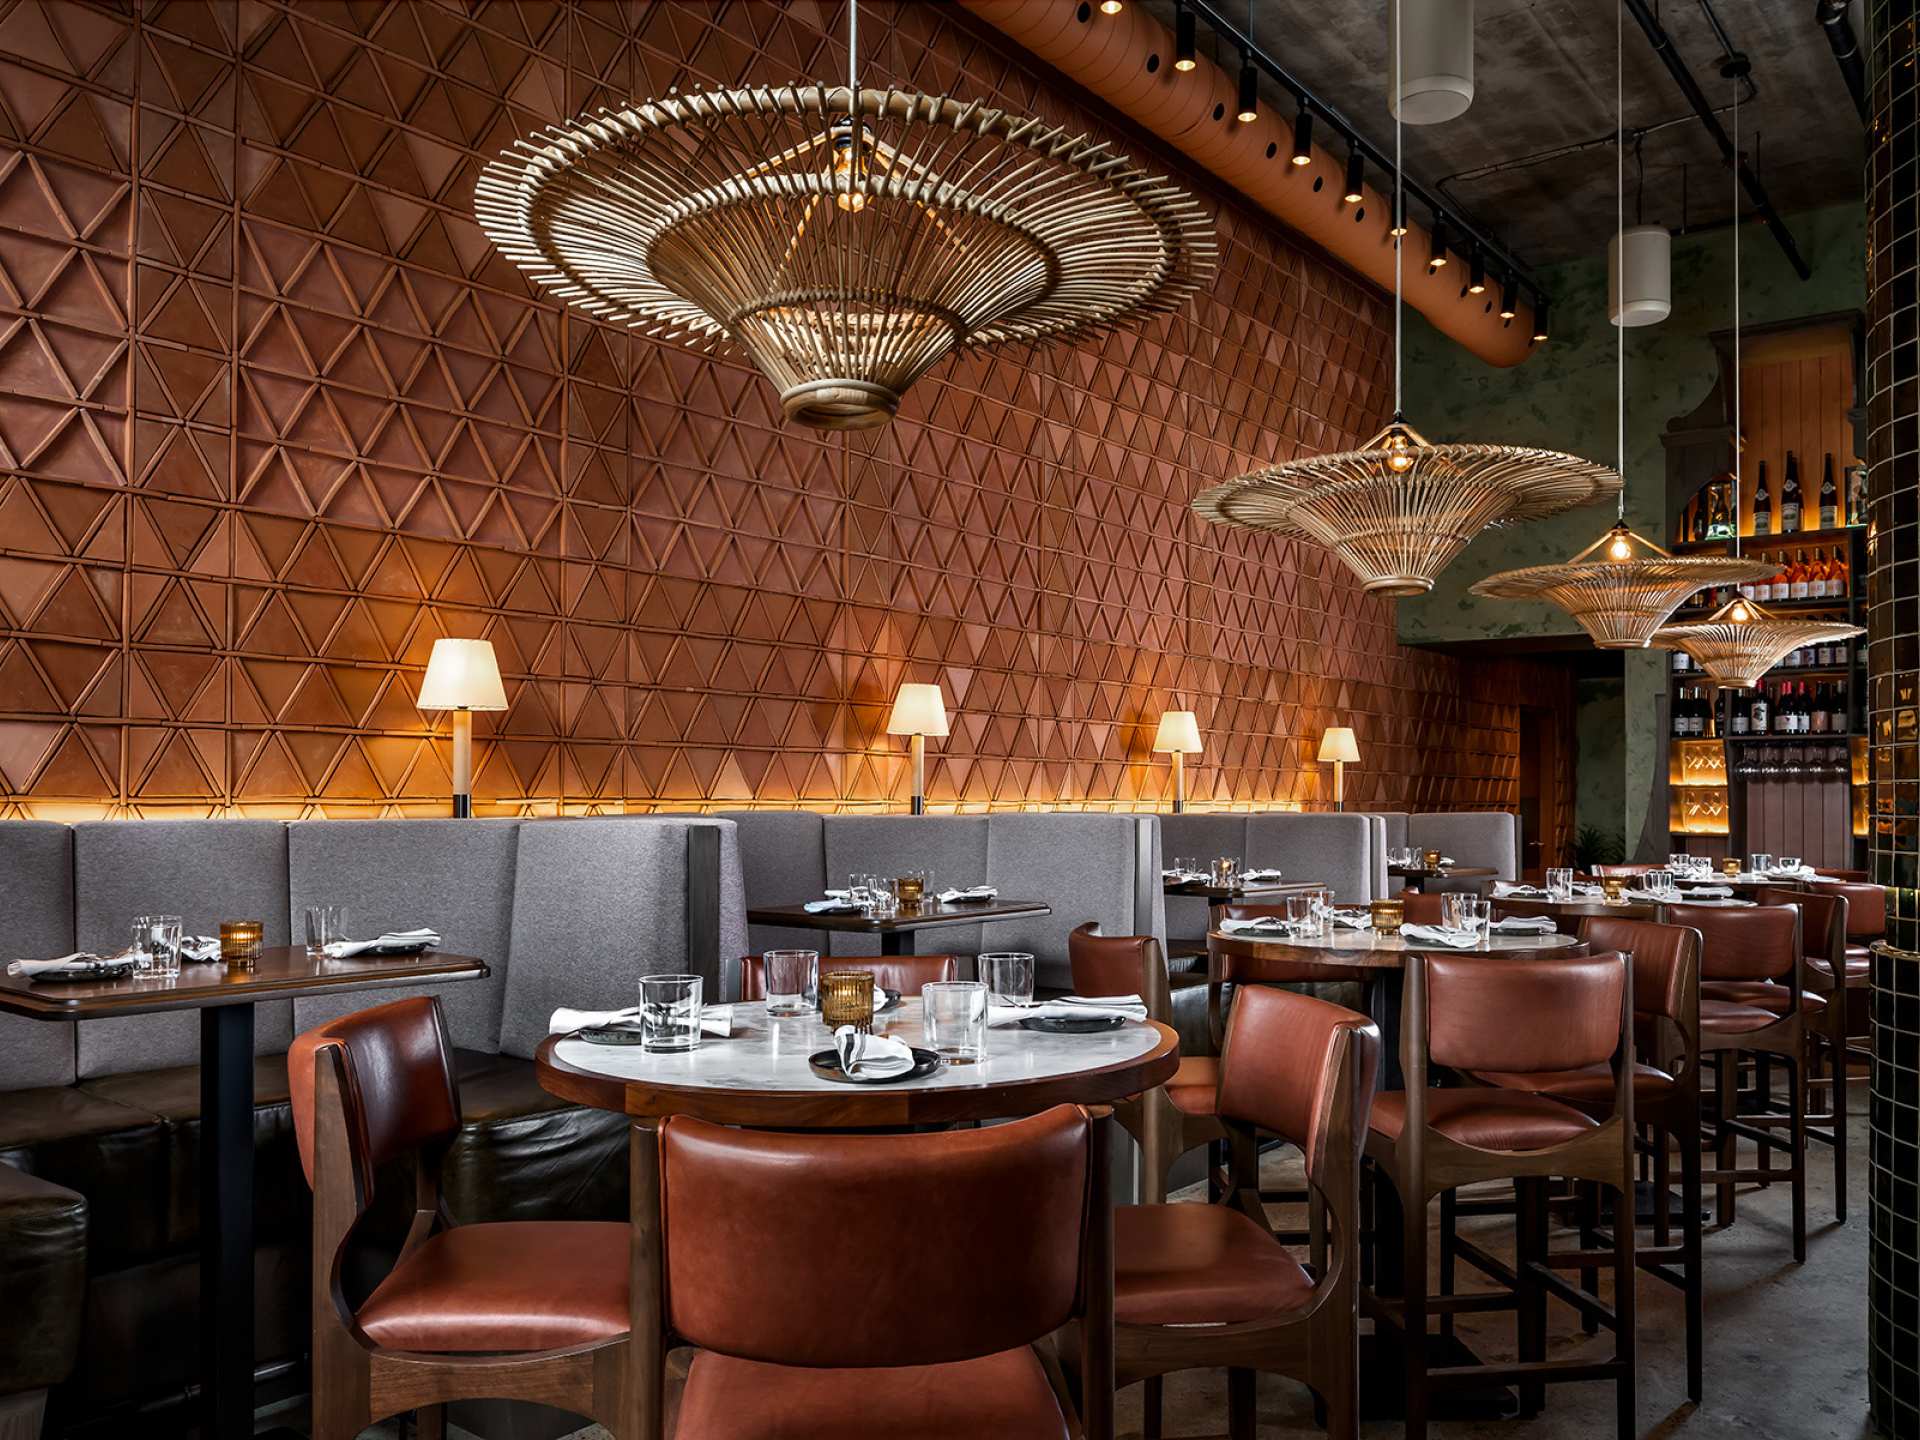 Late night food in Toronto | The dining room at Bar Chica with tables and light fixtures